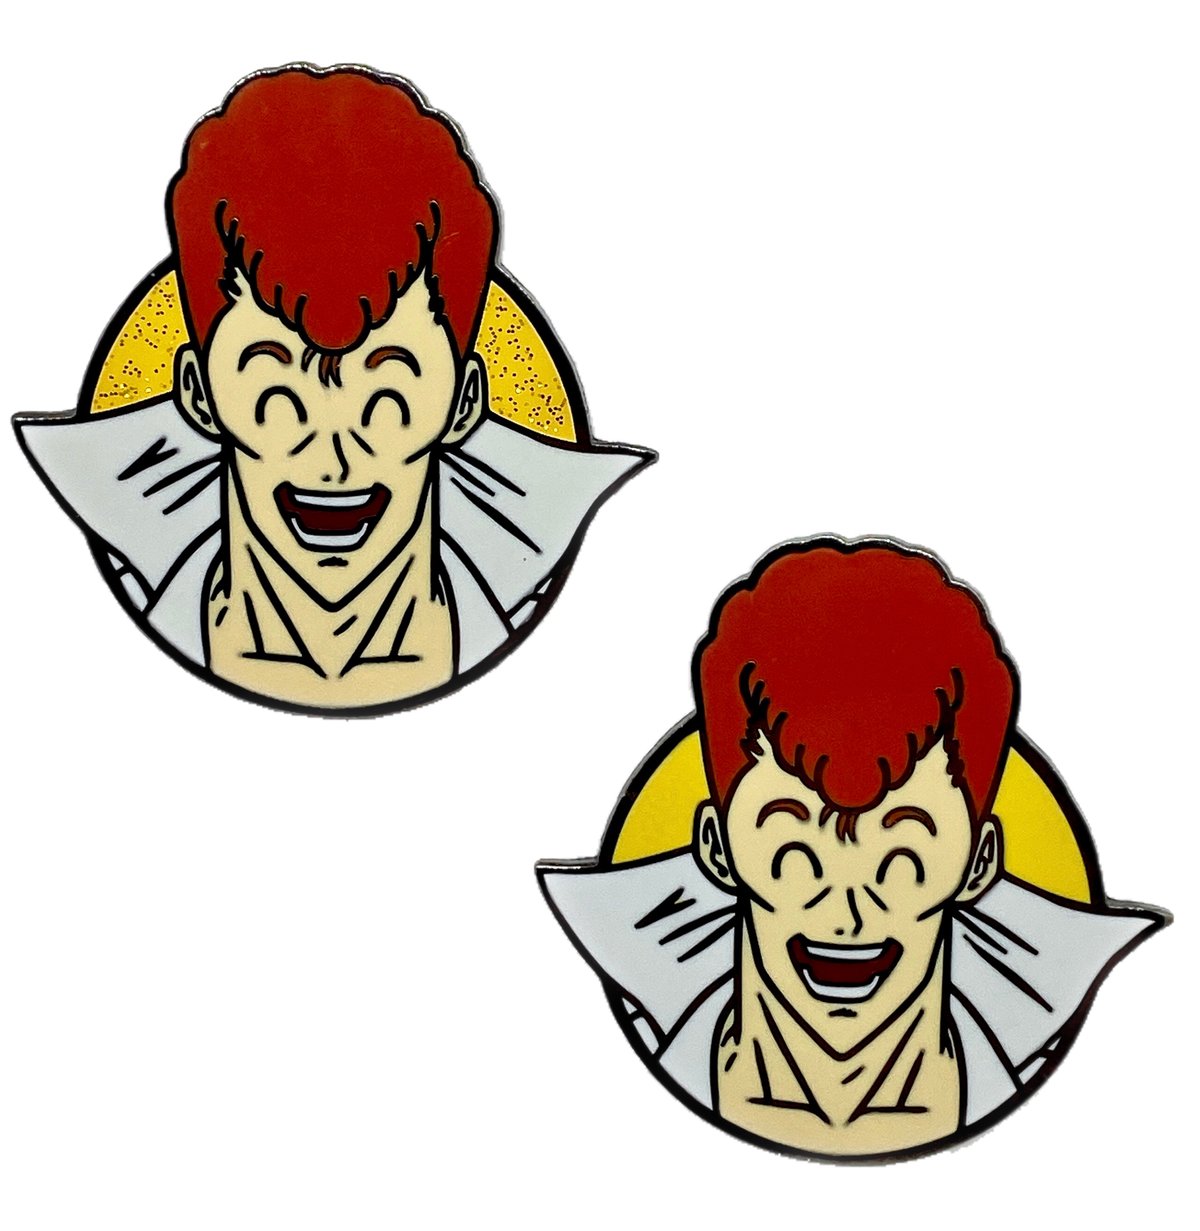 The Delinquent Friend Hard Enamel Pin